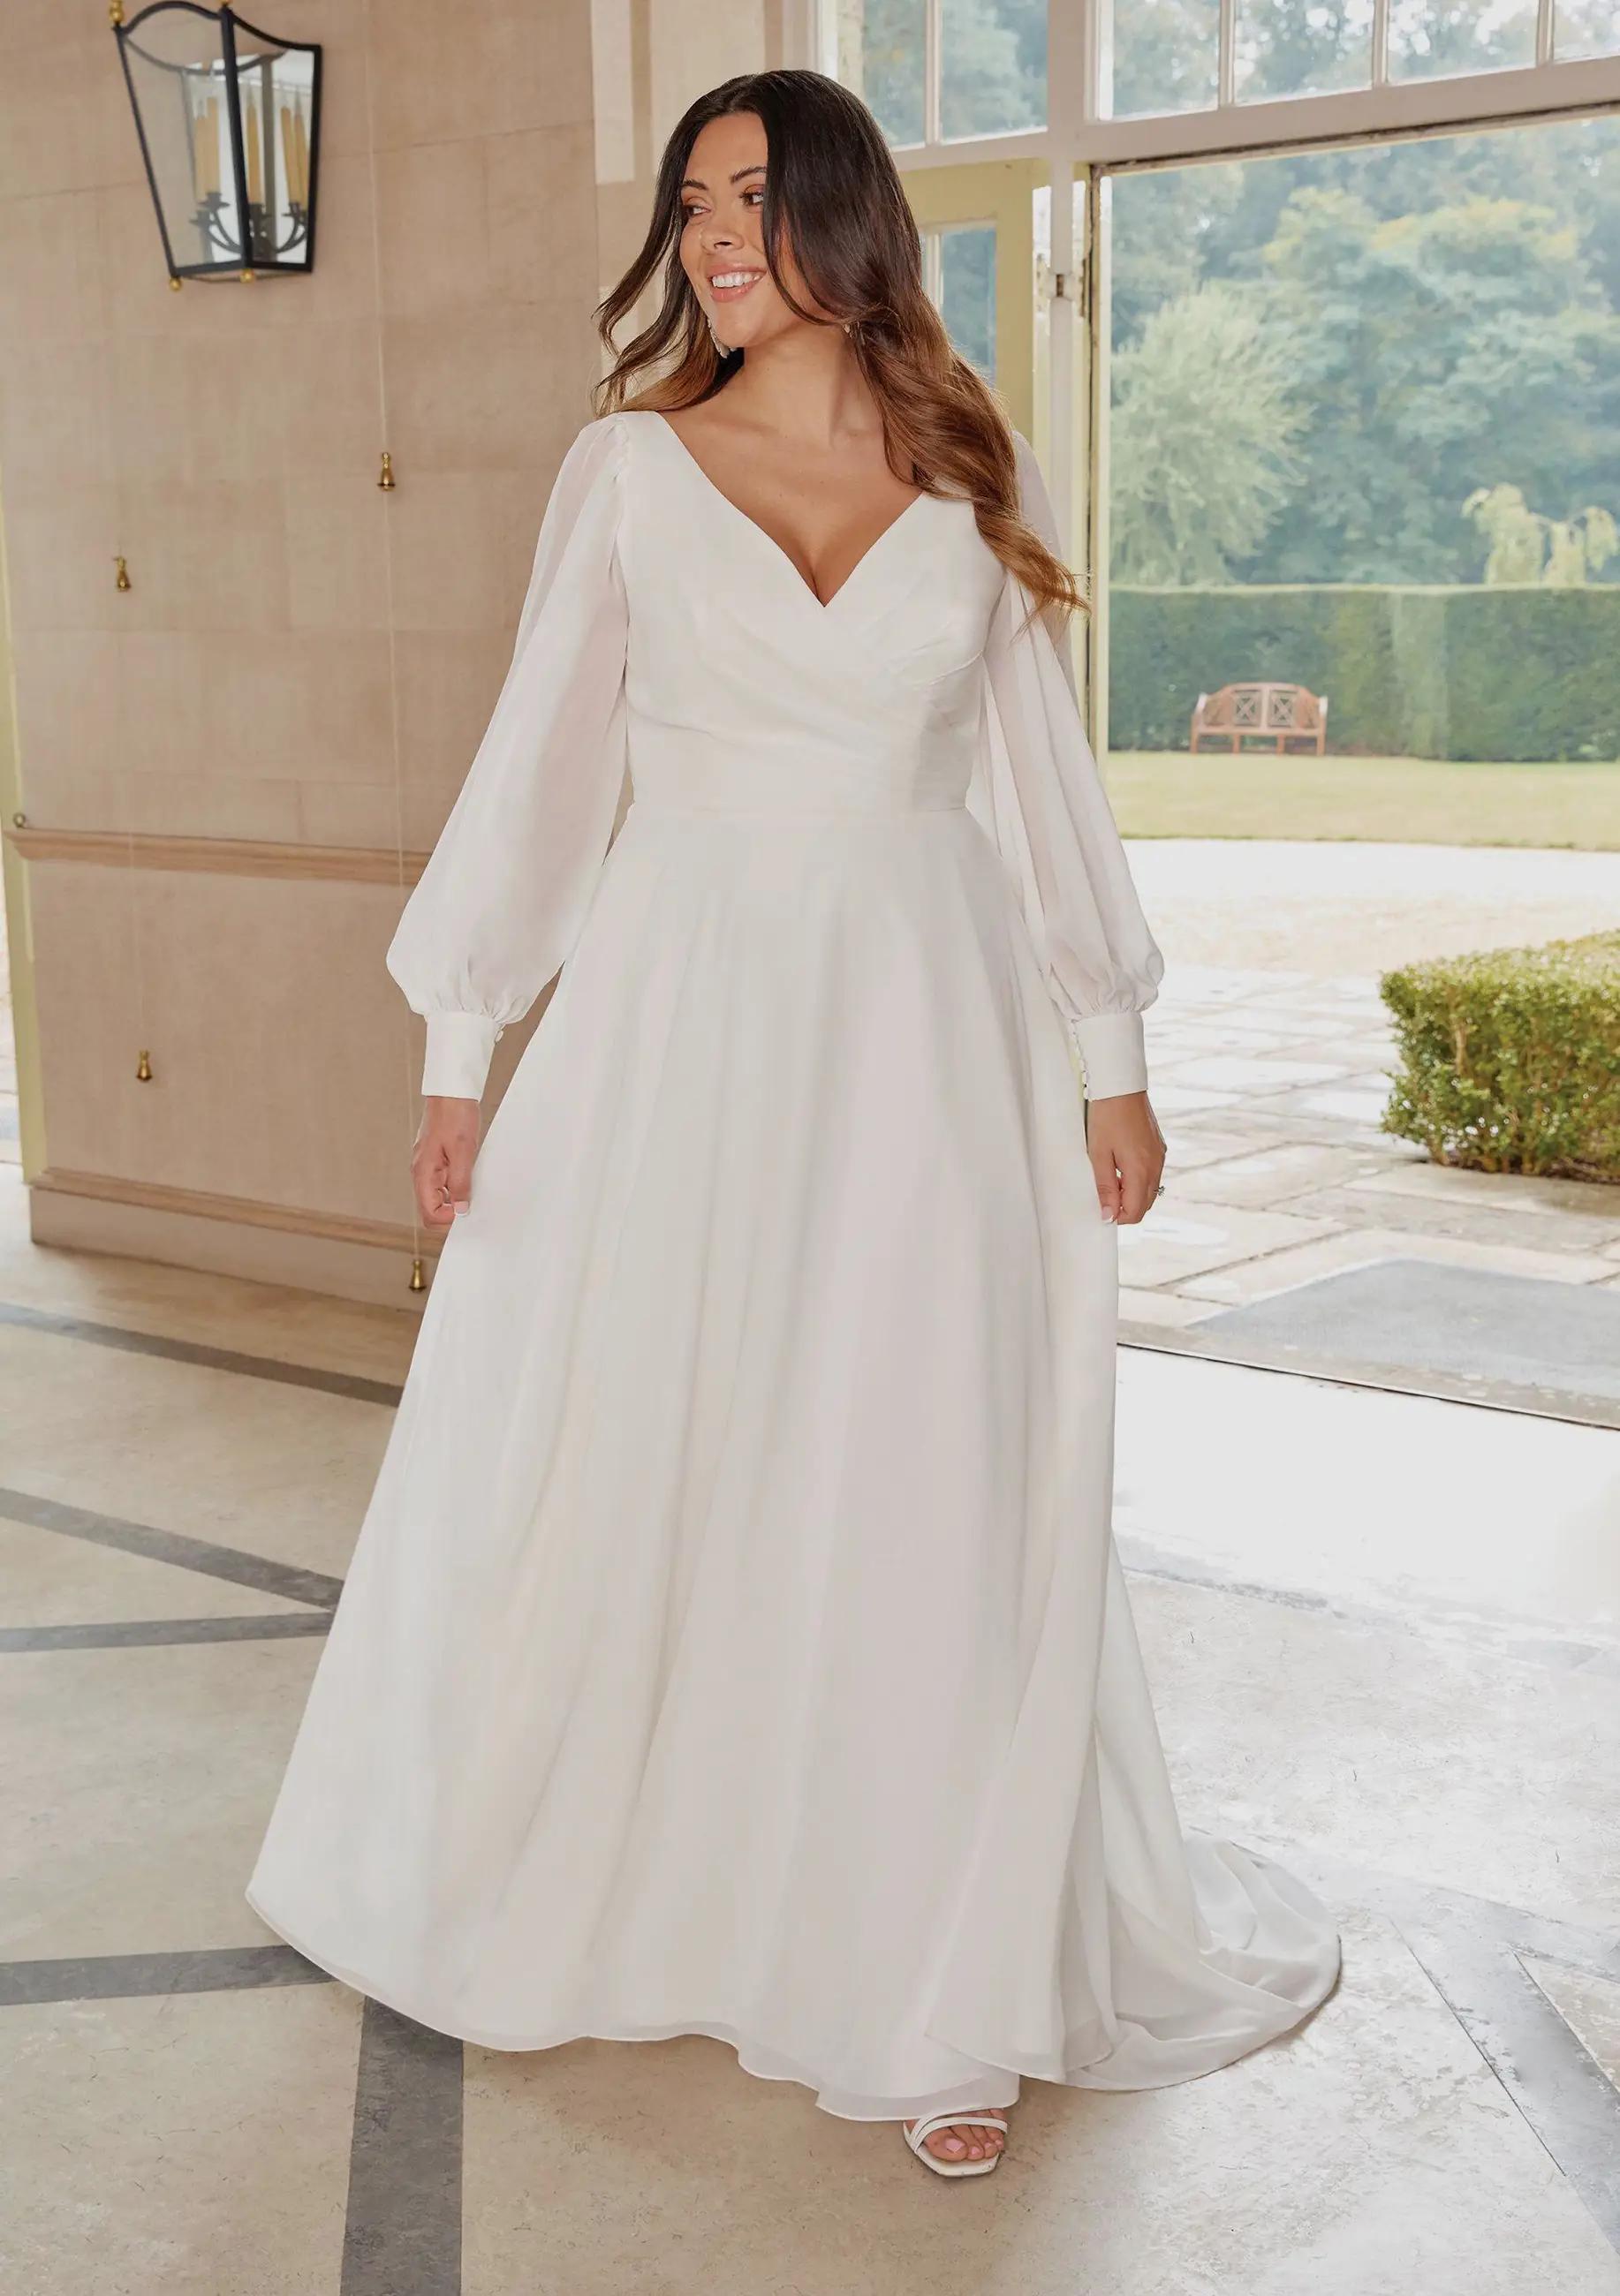 Plus size model wearing a white gown